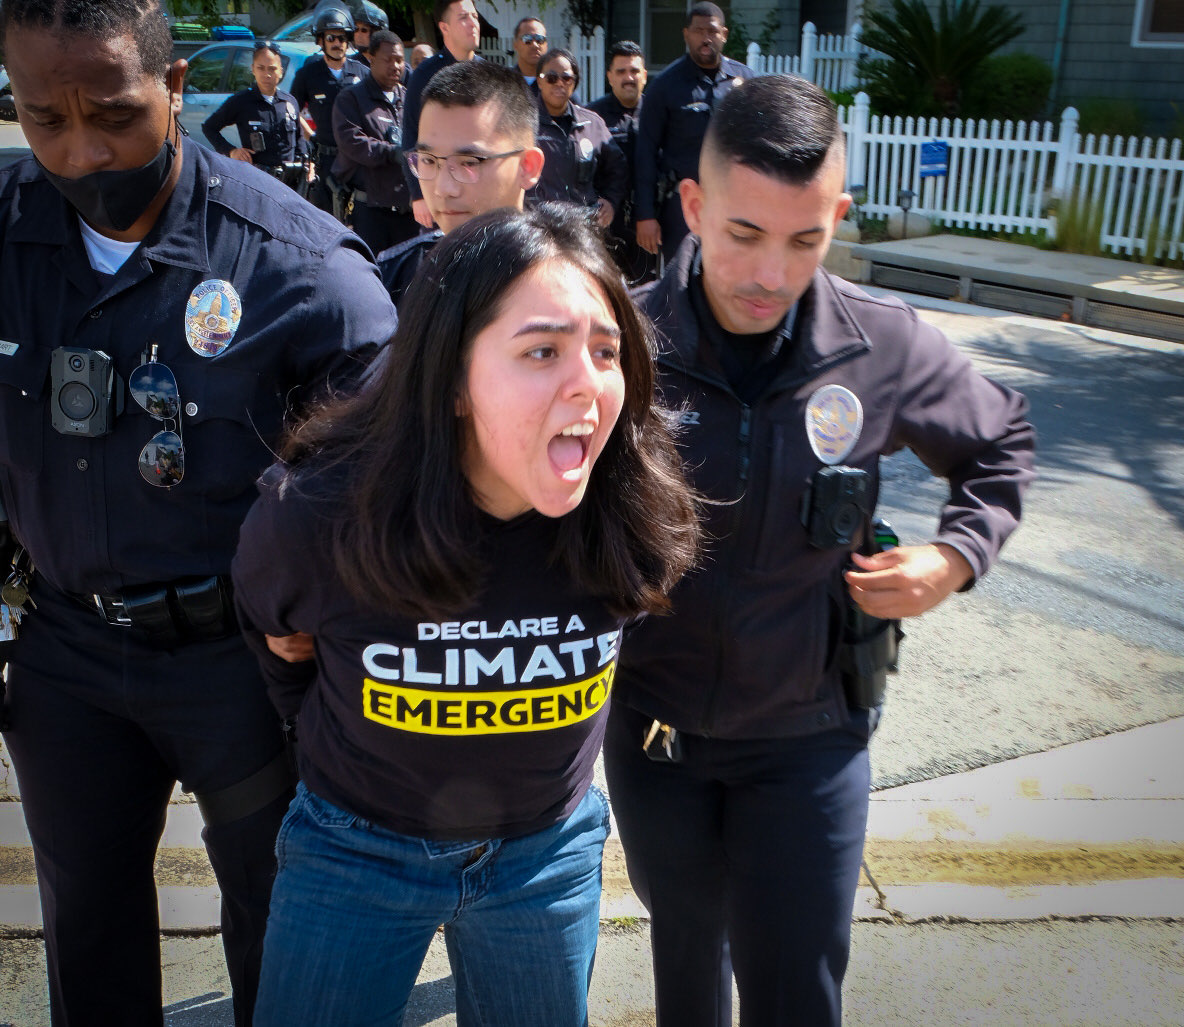 BREAKING: 6 young people were just arrested outside VP Harris' LA home. Last night dozens slept in front of her home to demand she urge Biden to declare a #ClimateEmergency and use every tool at his disposal to stop the climate crisis.